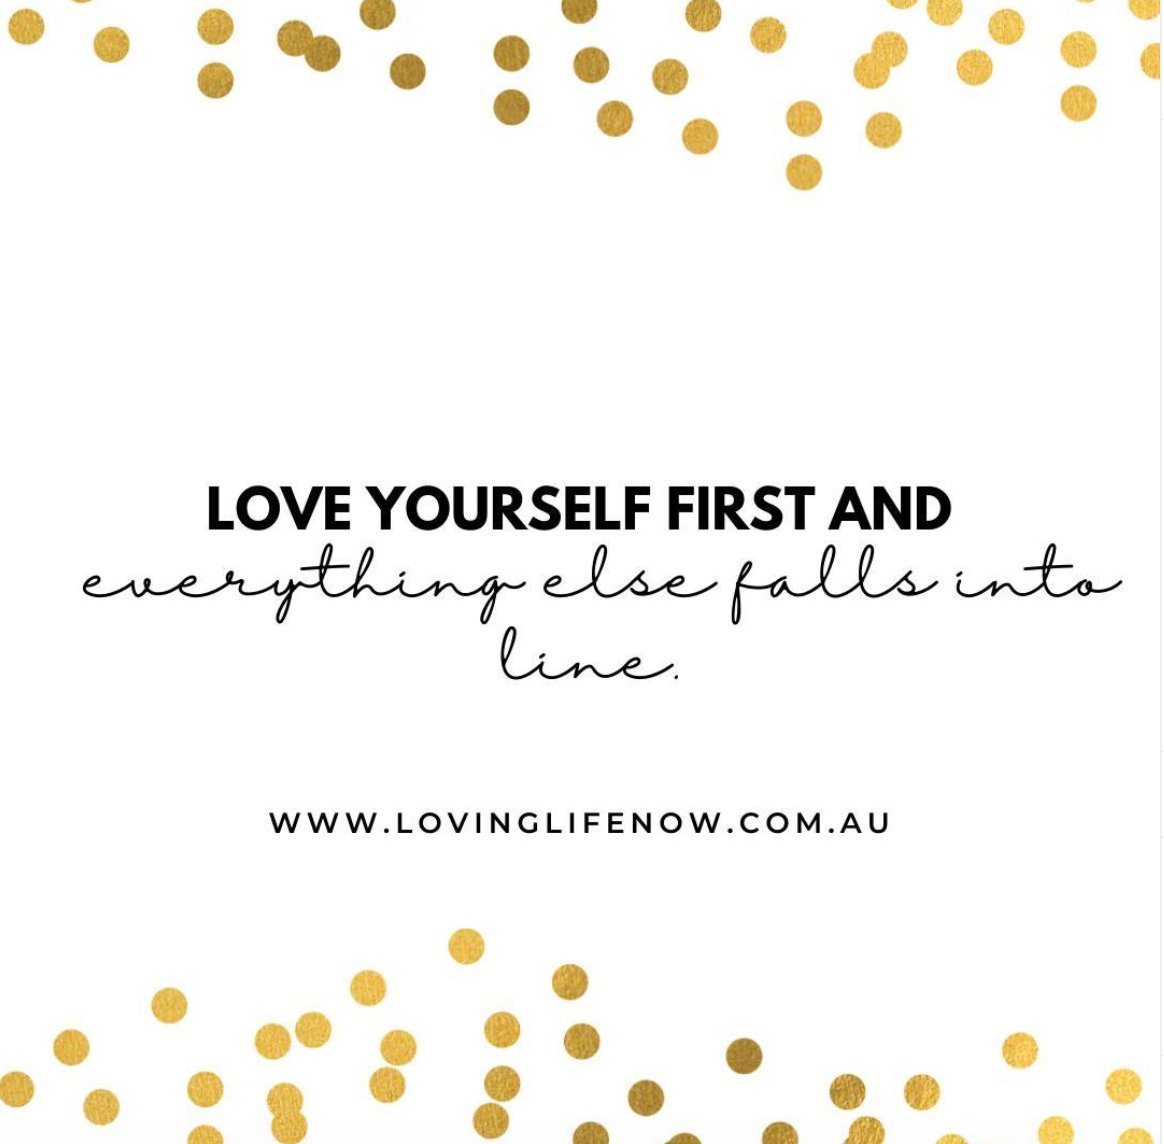 Love Yourself First and everything else falls into line

#LivingLovingLife
#OnlineIncomeOpportunity #WorkFromAnywhere #OnlineBusinessSolution
#SimonAndLeeAnne #LifestyleLoveAndBeyond
#LaptopLifestyle #PortableOnlineBusiness
#SimonHaggard #LeeAnneHaggard #LovingLifeNow